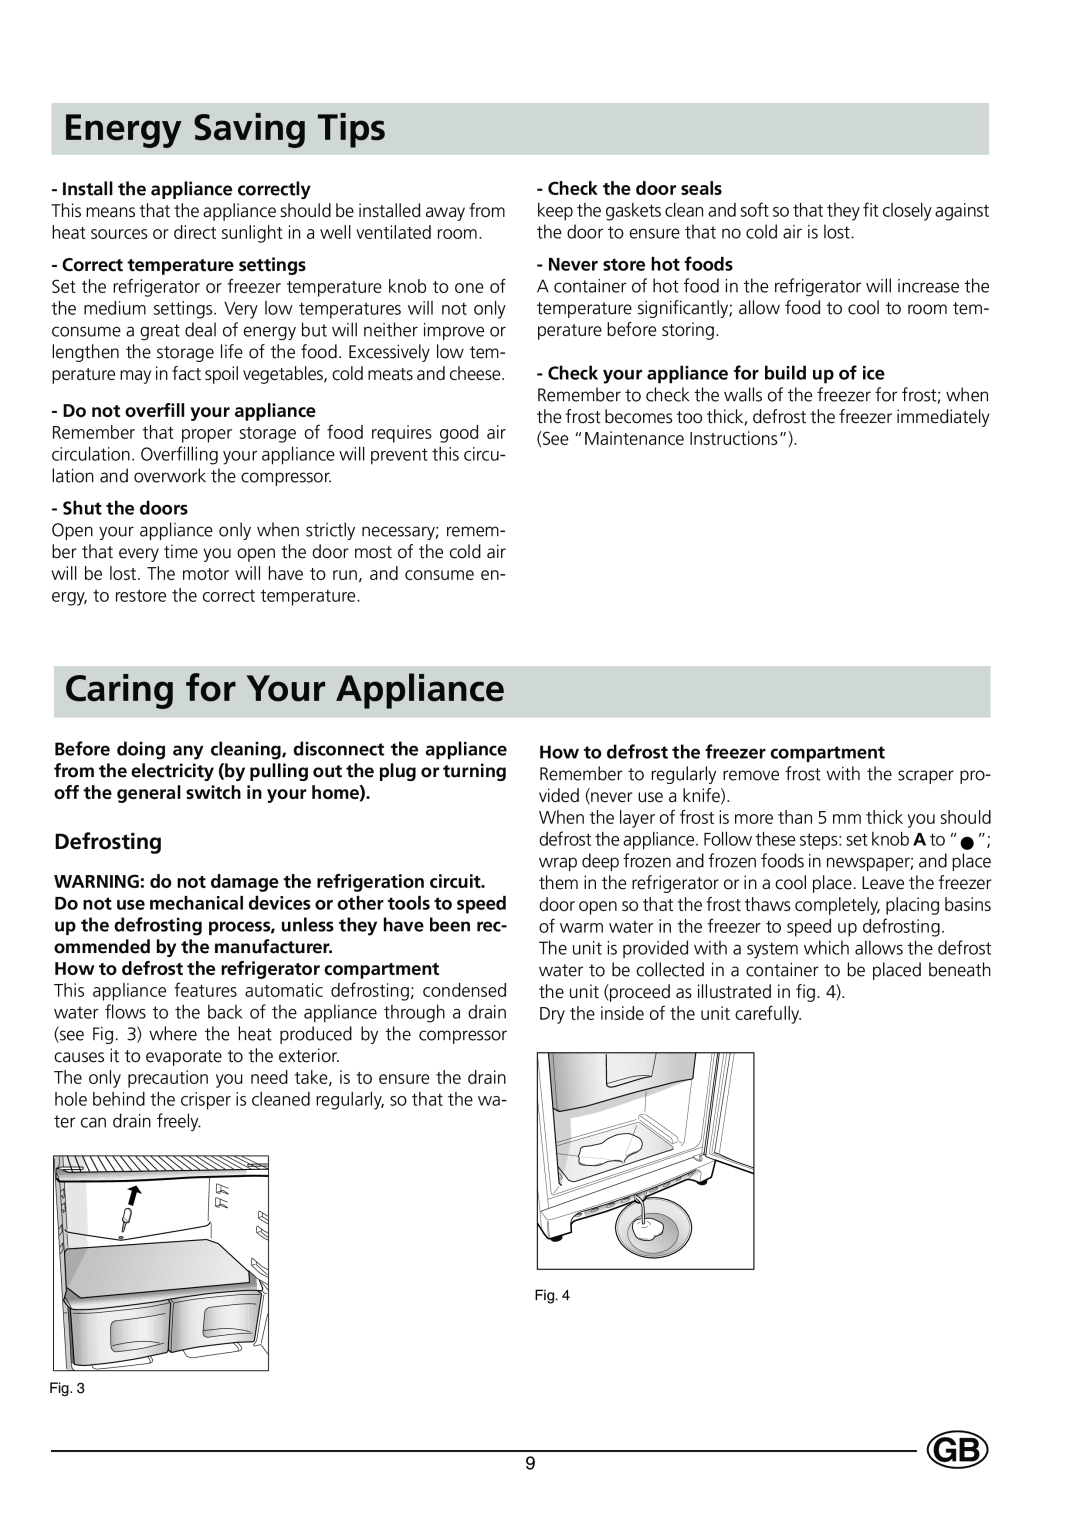 Indesit C 133 UK manual Energy Saving Tips, Caring for Your Appliance, Defrosting 